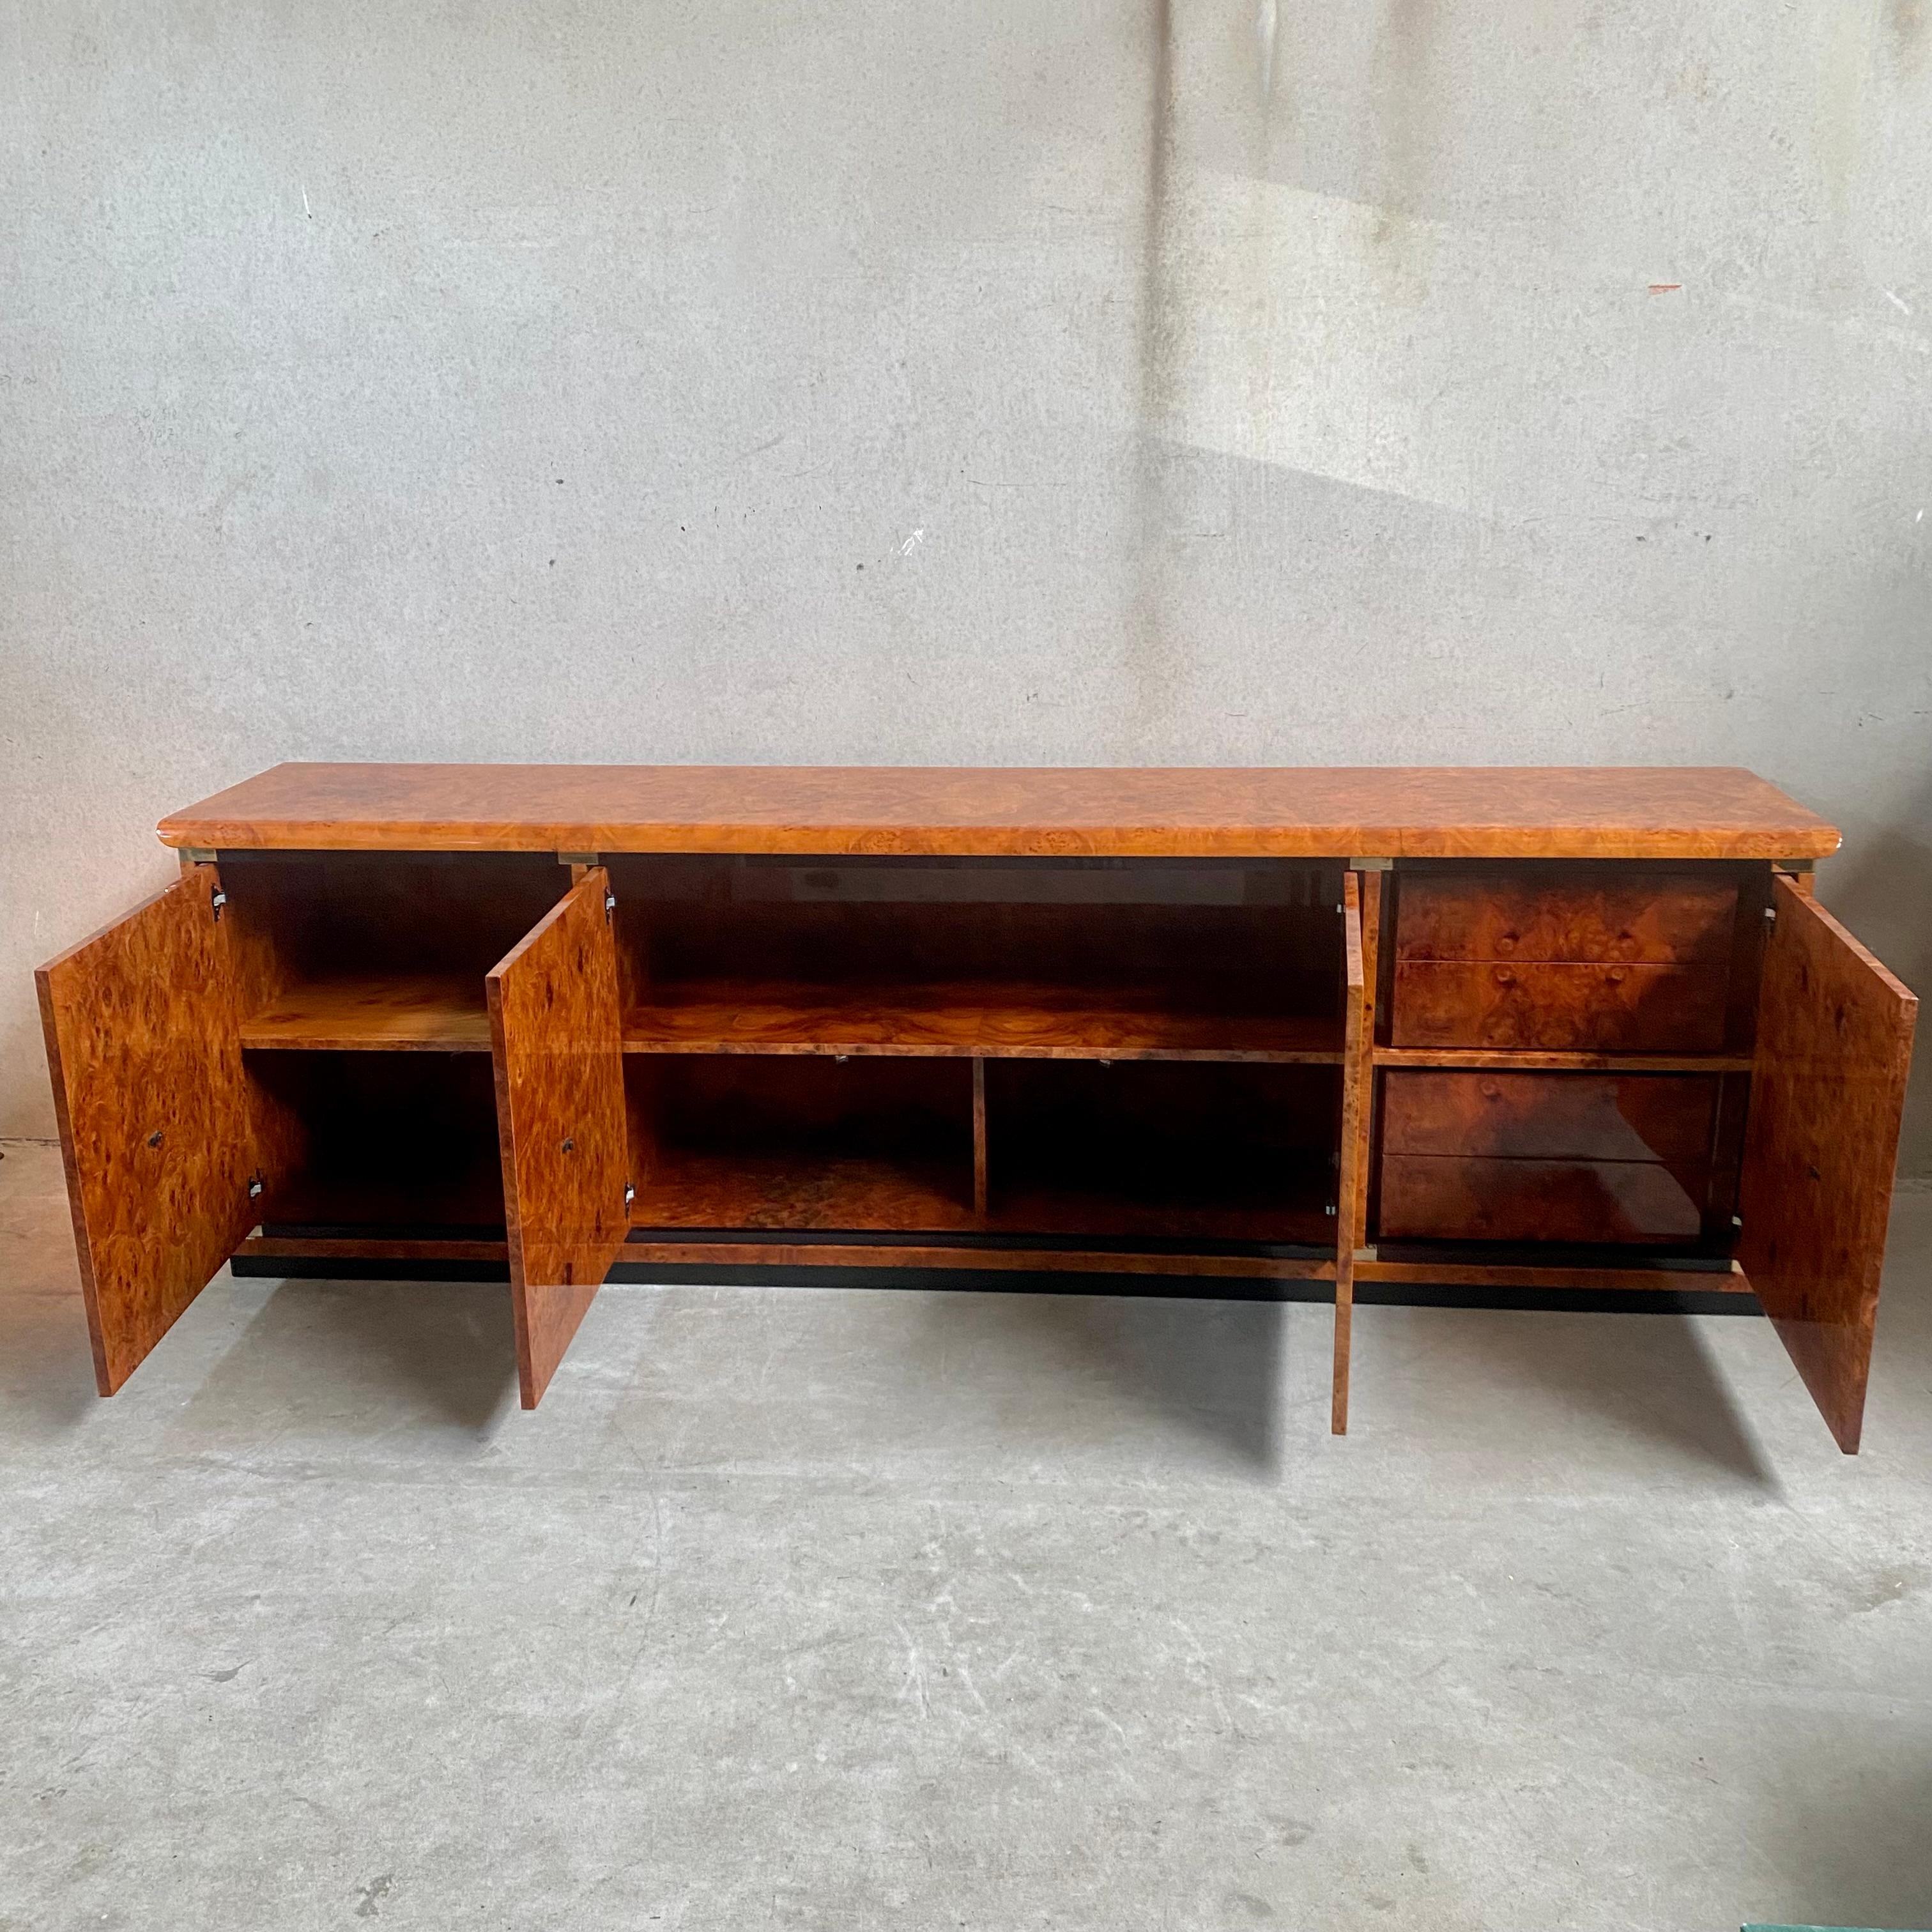 Briar Burl Wood Sideboard by Guerini Emilio for Gdm 24 Kt Gold Plated Italy 1980 For Sale 10